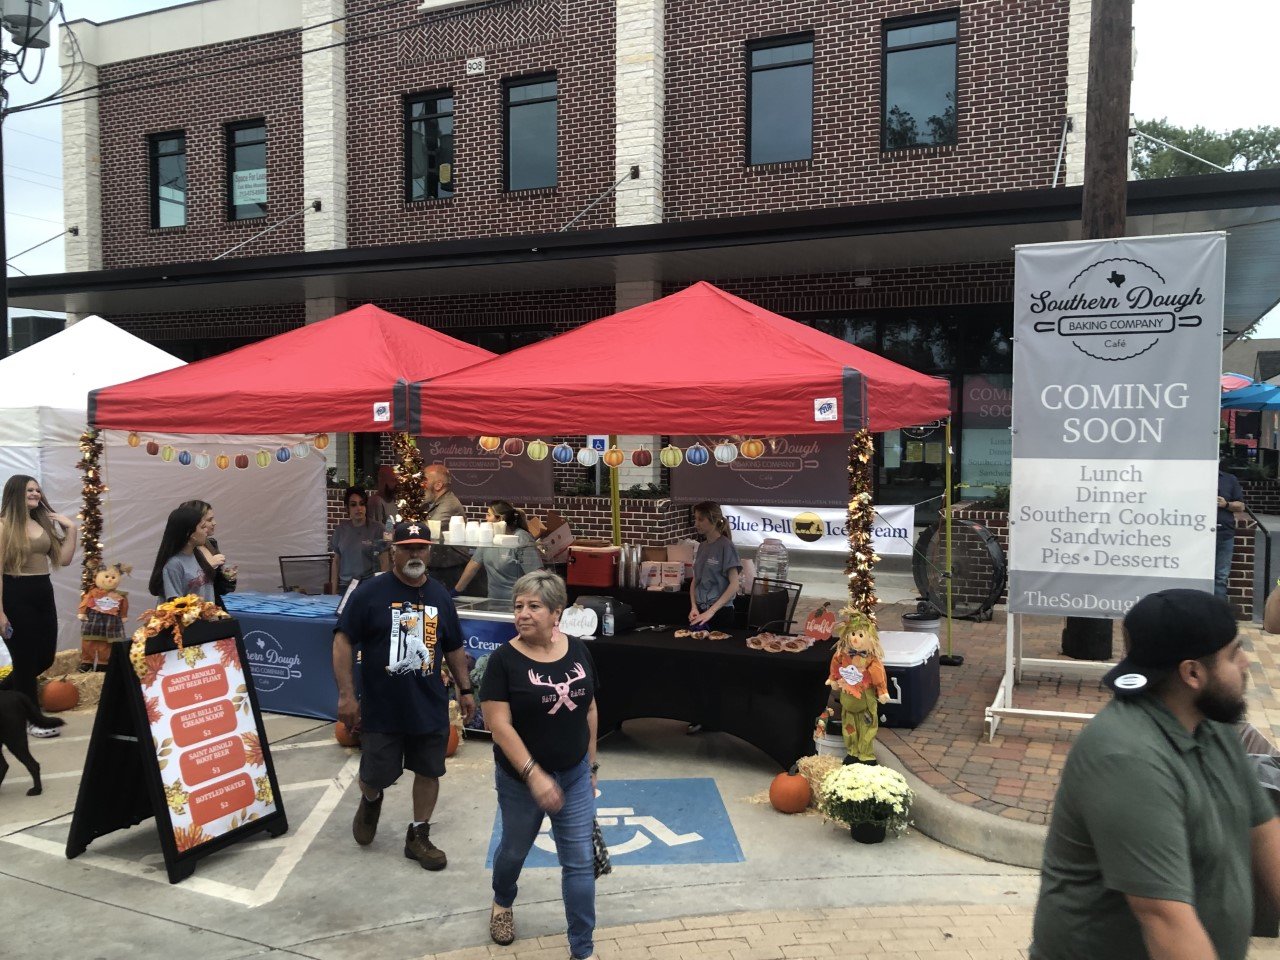 The Southern Dough Bakery expects to open next month in downtown Katy, but it was represented at the Katy Rice Festival, handing out free cookies.